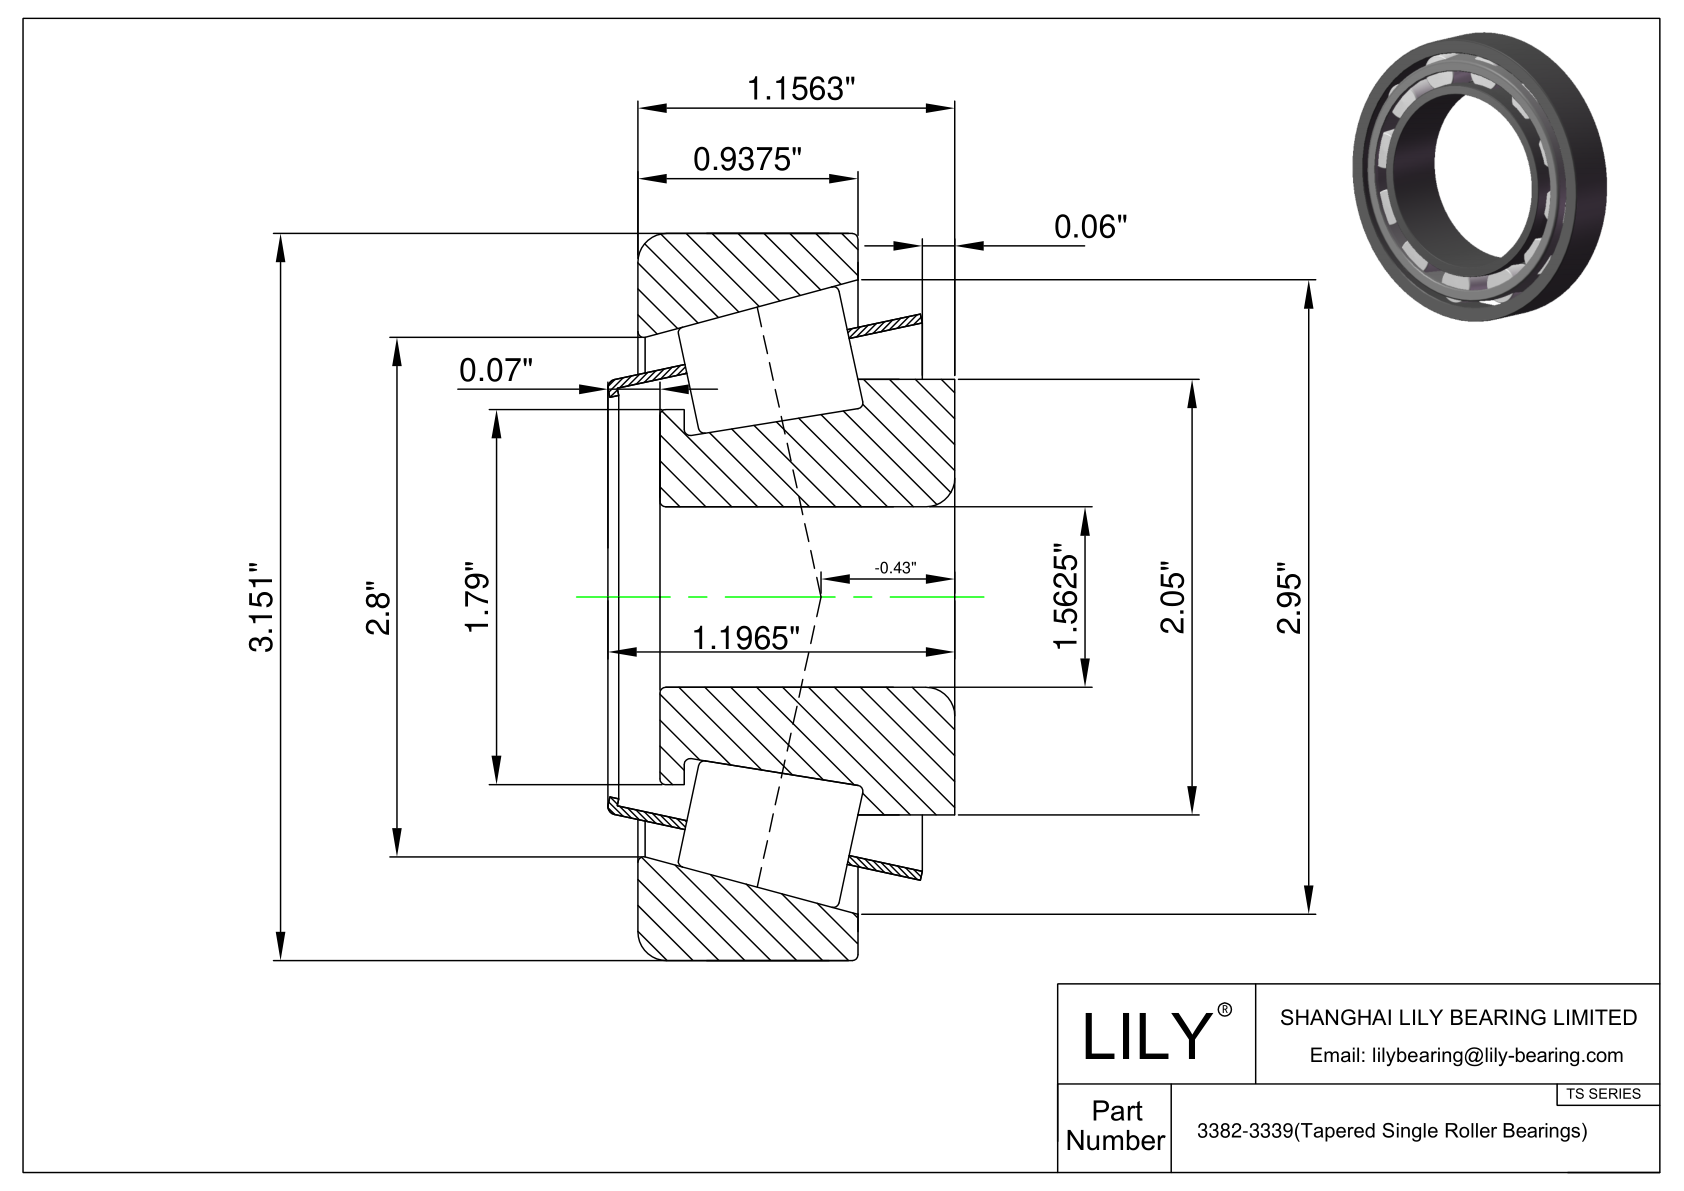 3382-3339 TS (Tapered Single Roller Bearings) (Imperial) cad drawing